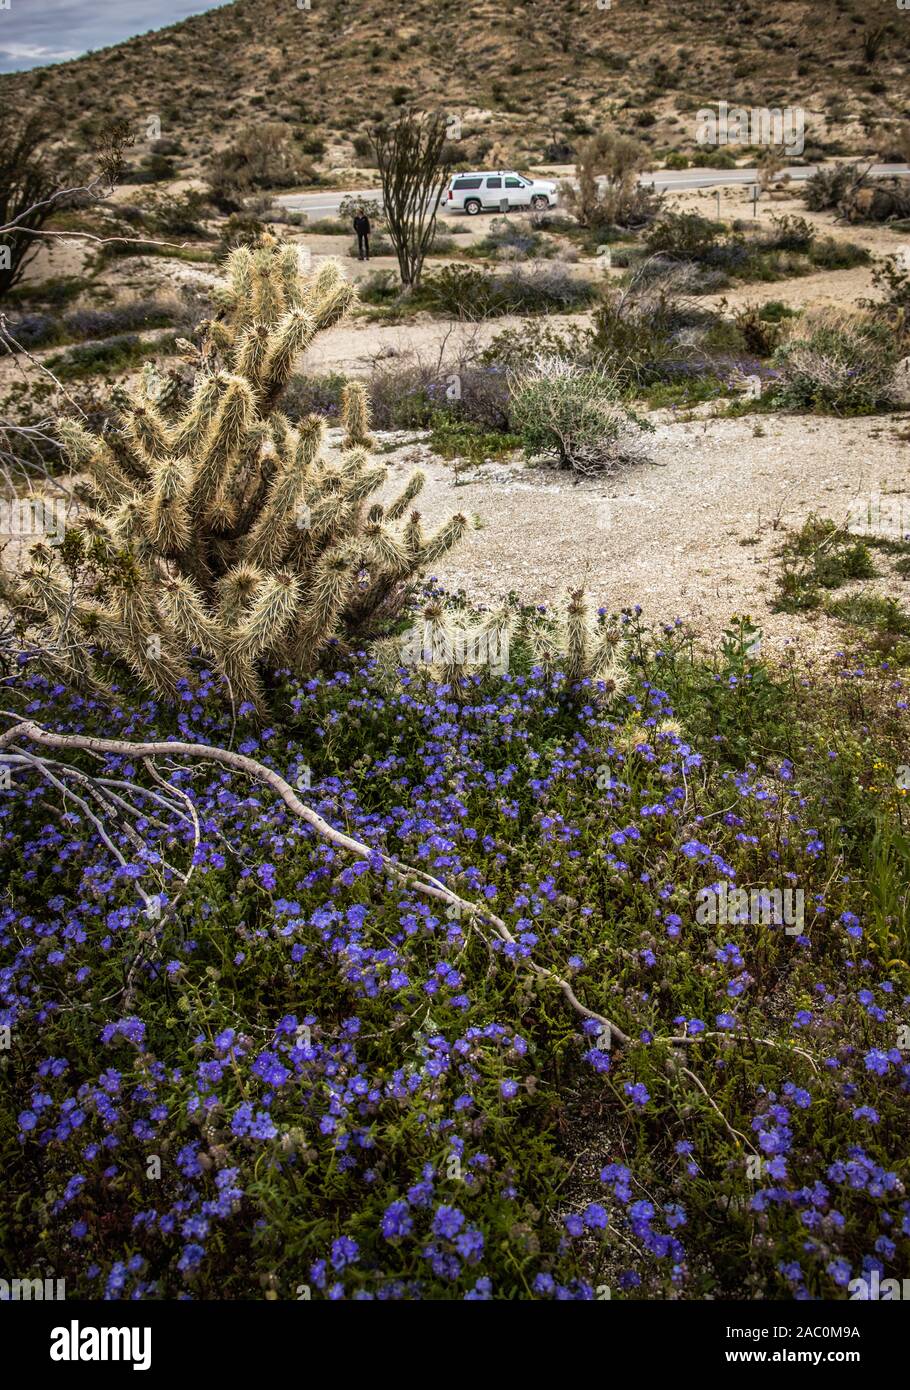 Blooming wildflowers in desert landscape in Southern California USA Stock Photo